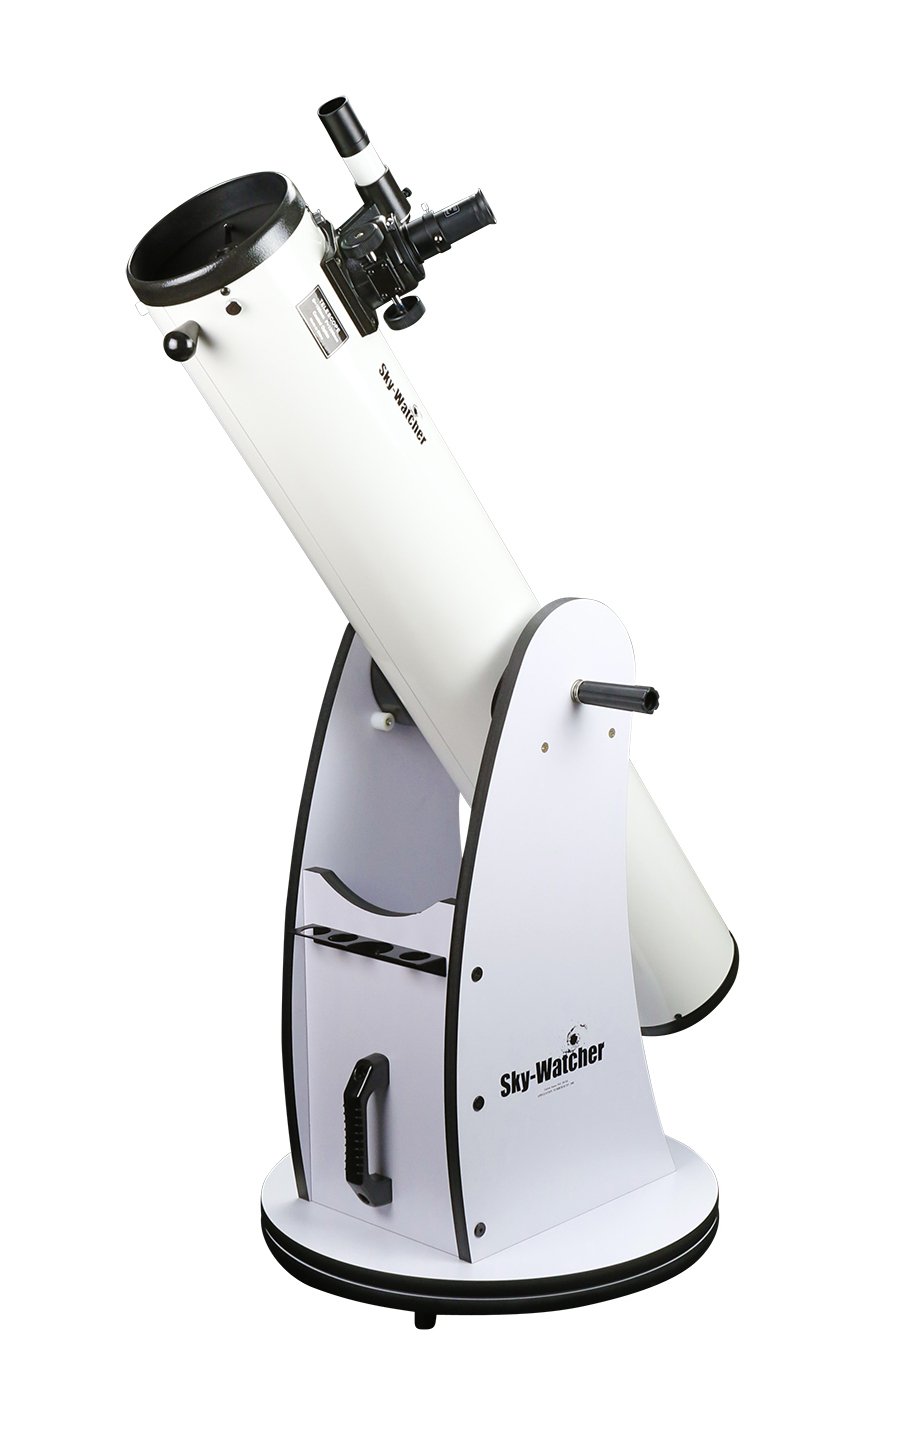 Sky Watcher Sky-Watcher Classic 250 Dobsonian 10-inch Aperature Telescope – Solid-Tube – Simple, Traditional Design – Easy to Use, Ideal for Beginners (S11620)